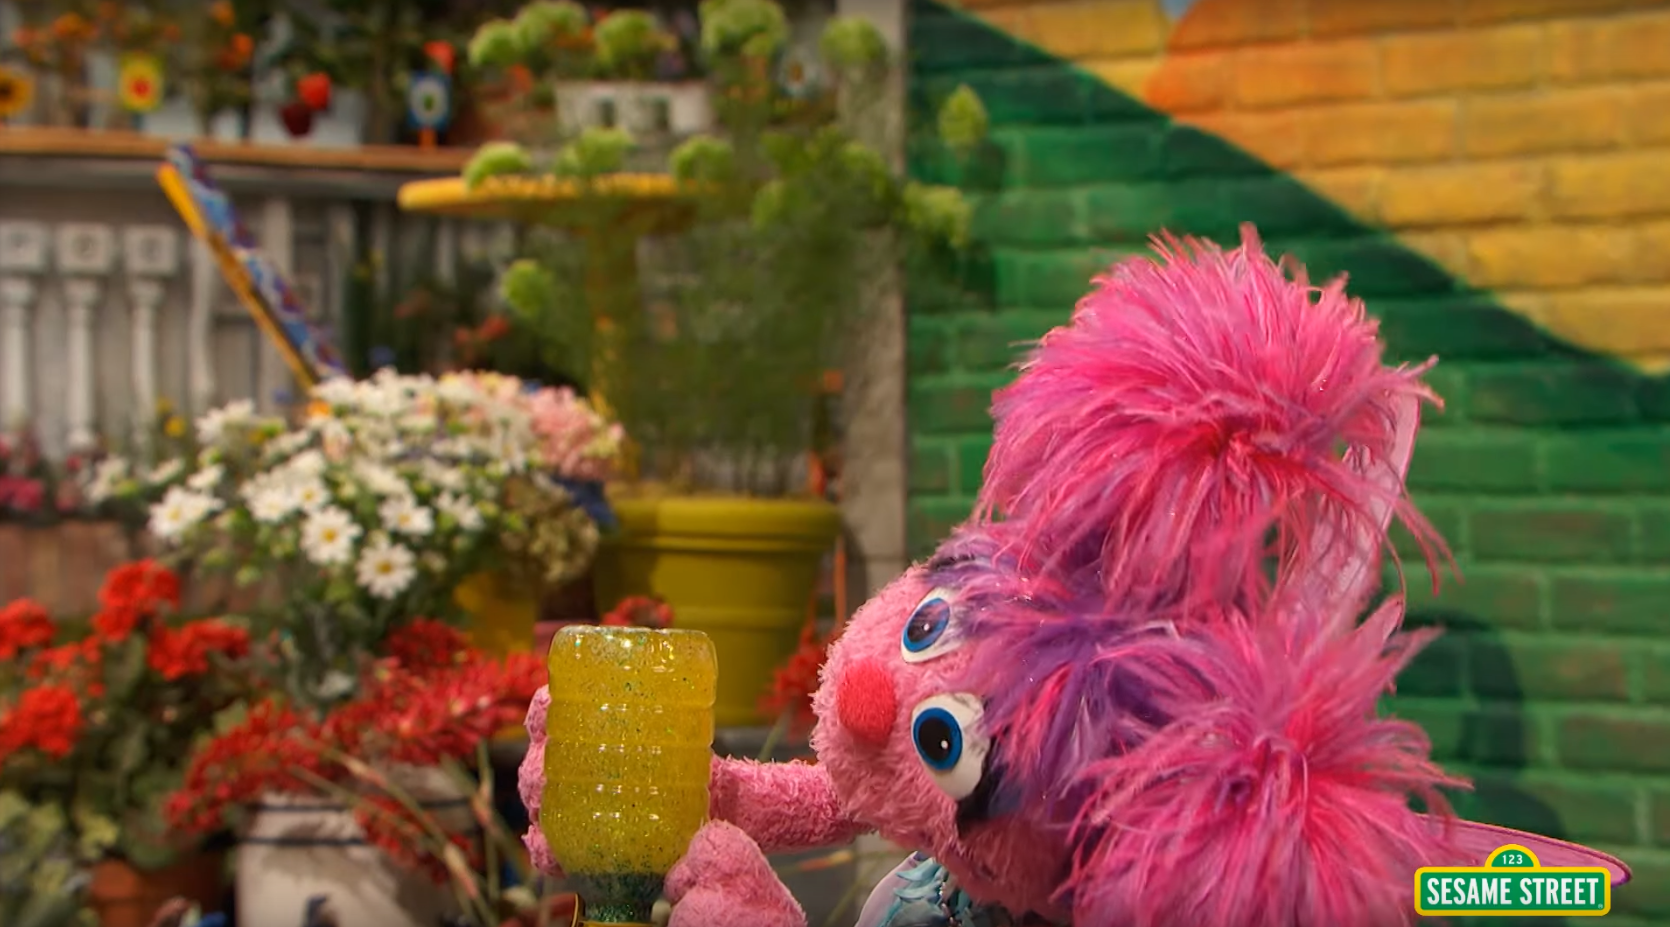 Slow Down and Settle Down video from Sesame Street